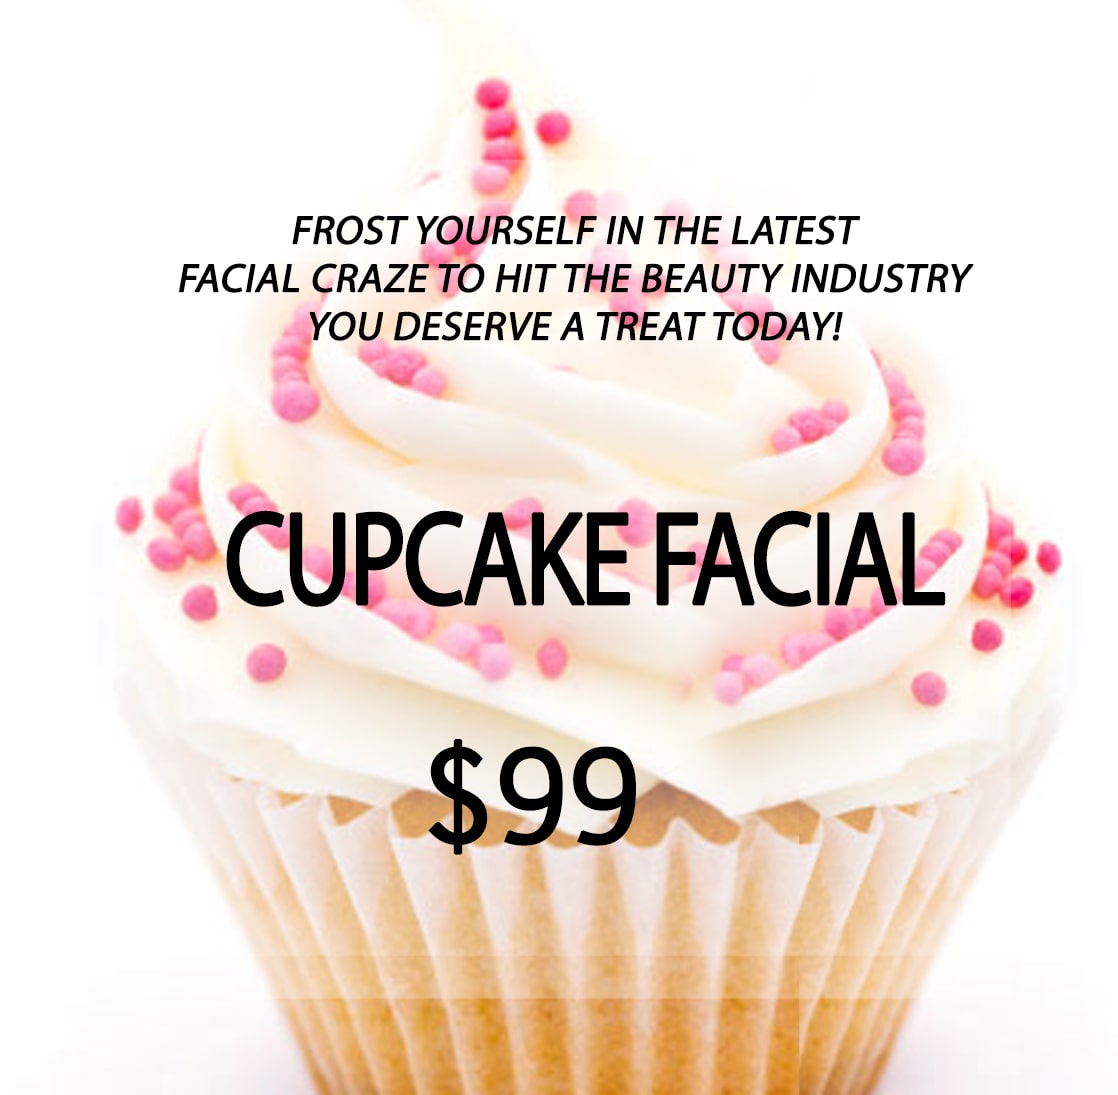 cupcake-facial-ut-beauty-lab-and-laser